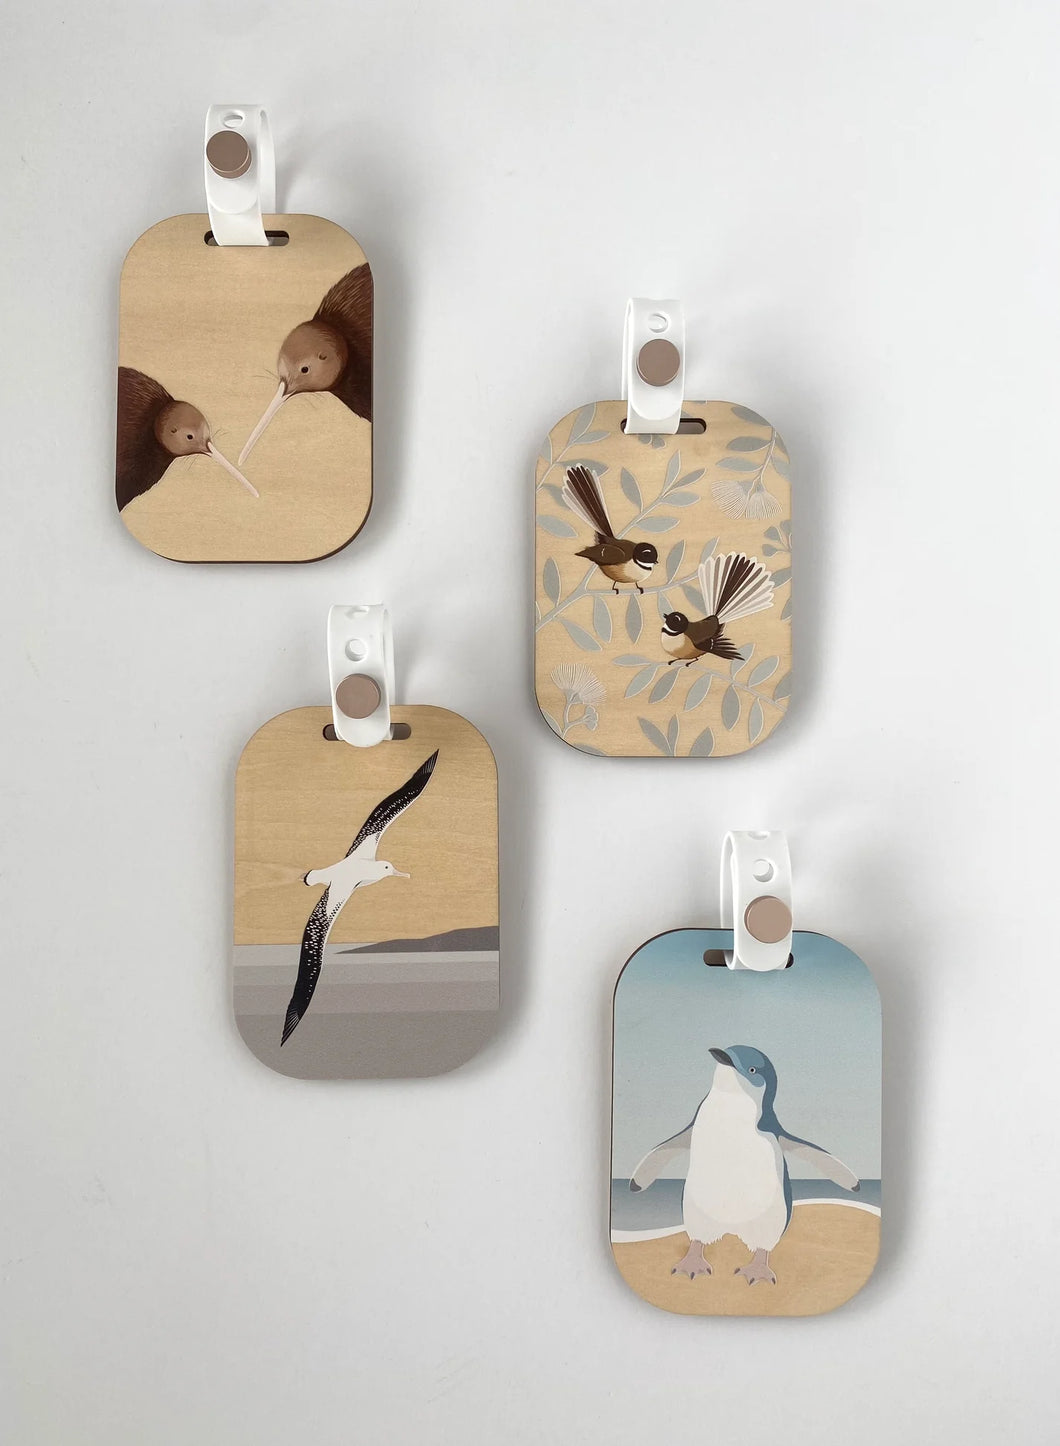 Fantail Luggage Tag - Hansby Design